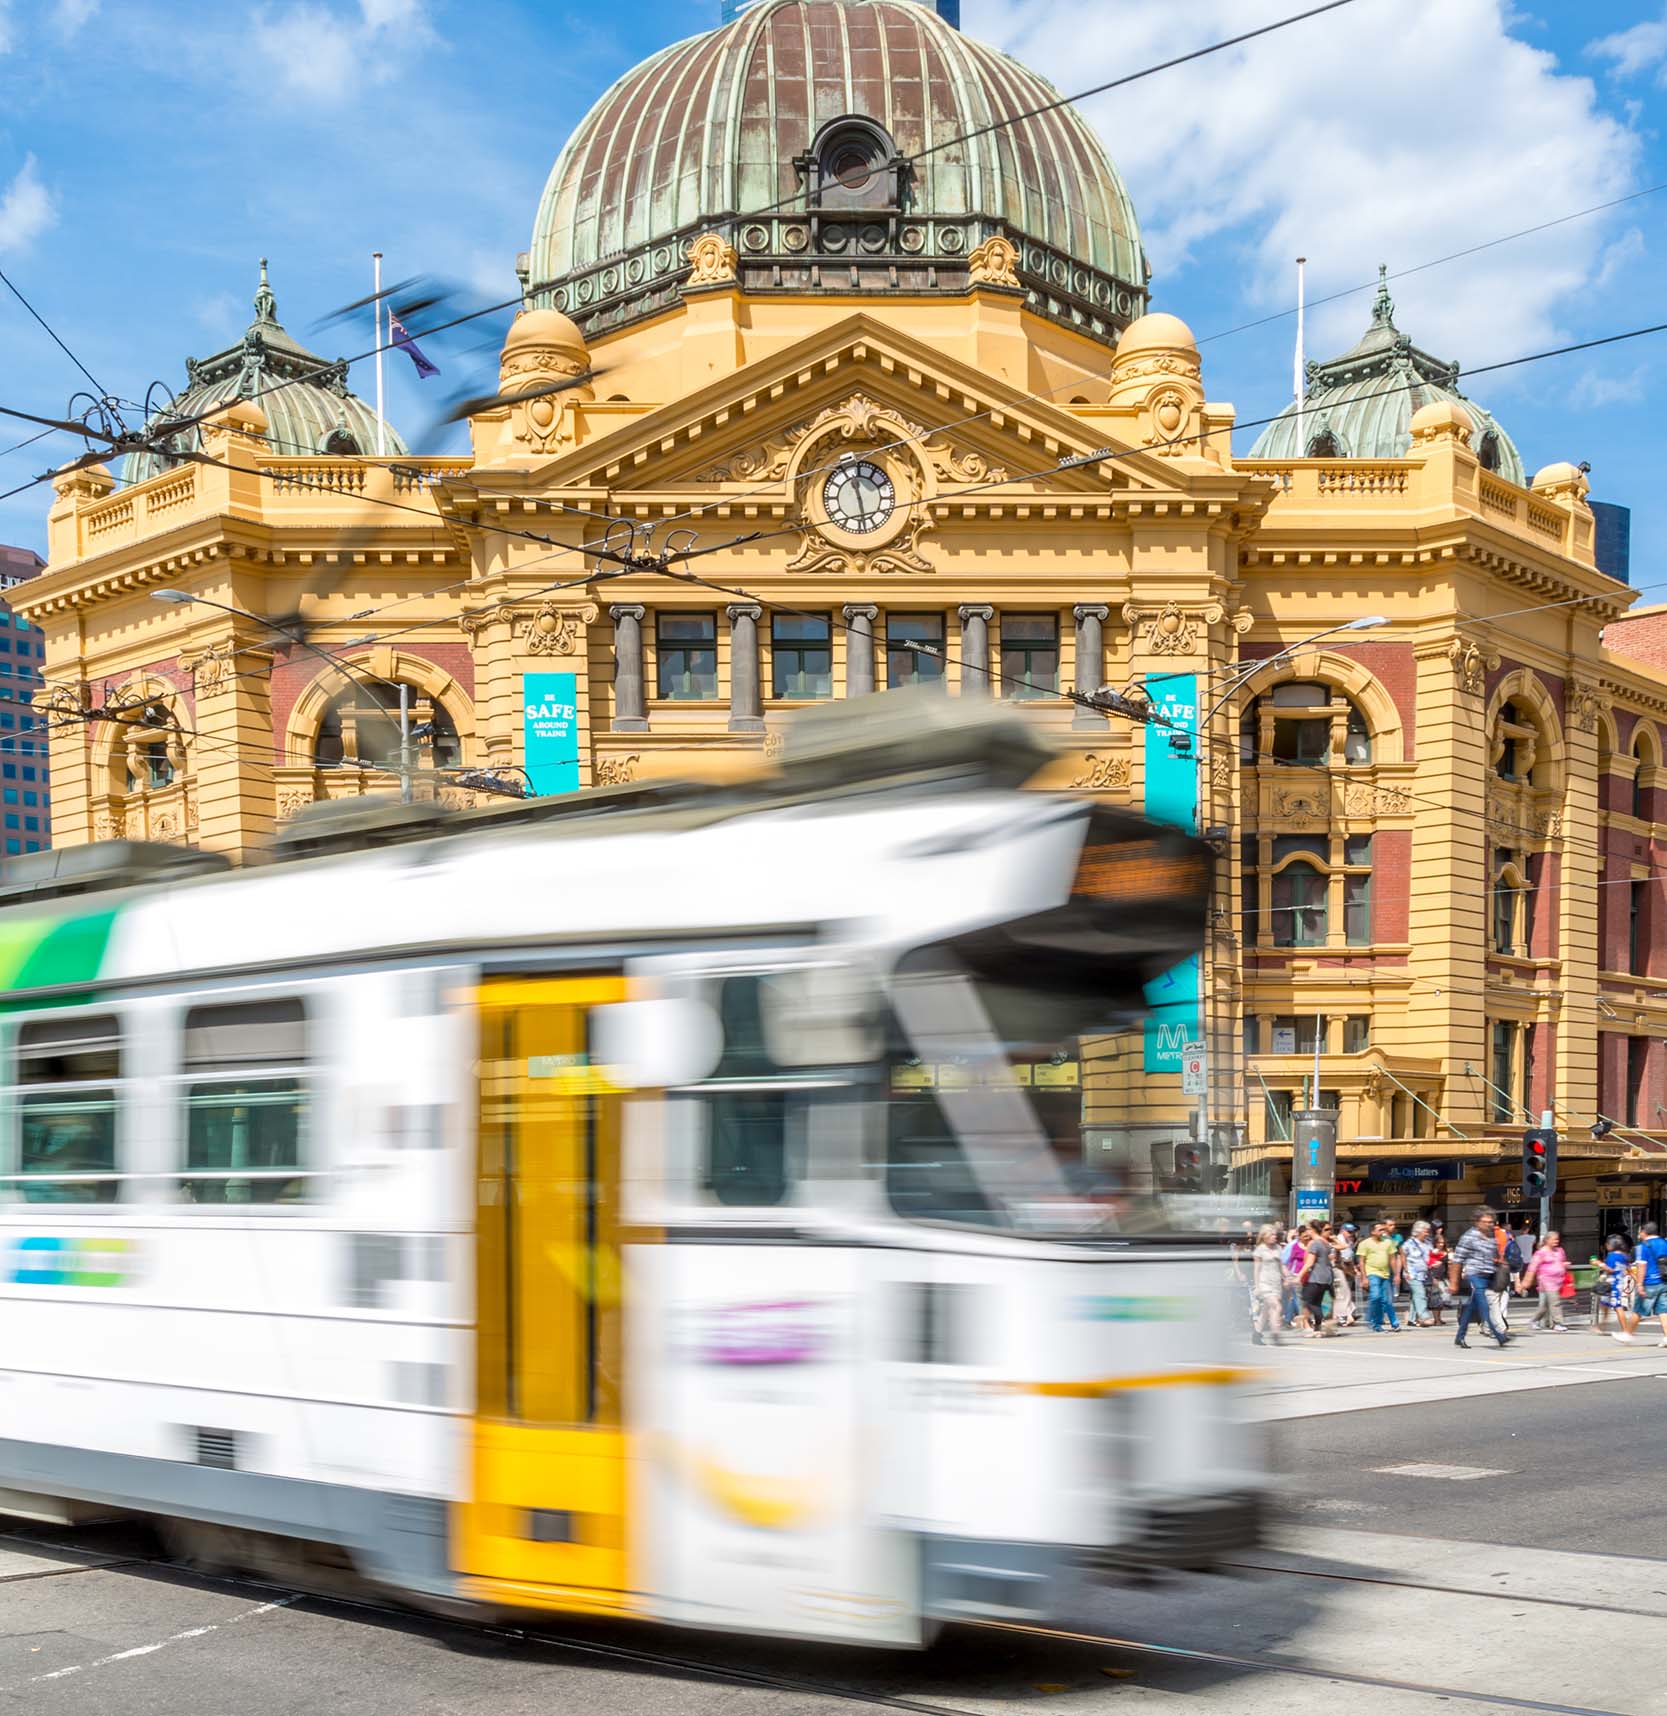 A tram in motion travelling past Flinders Street Station.